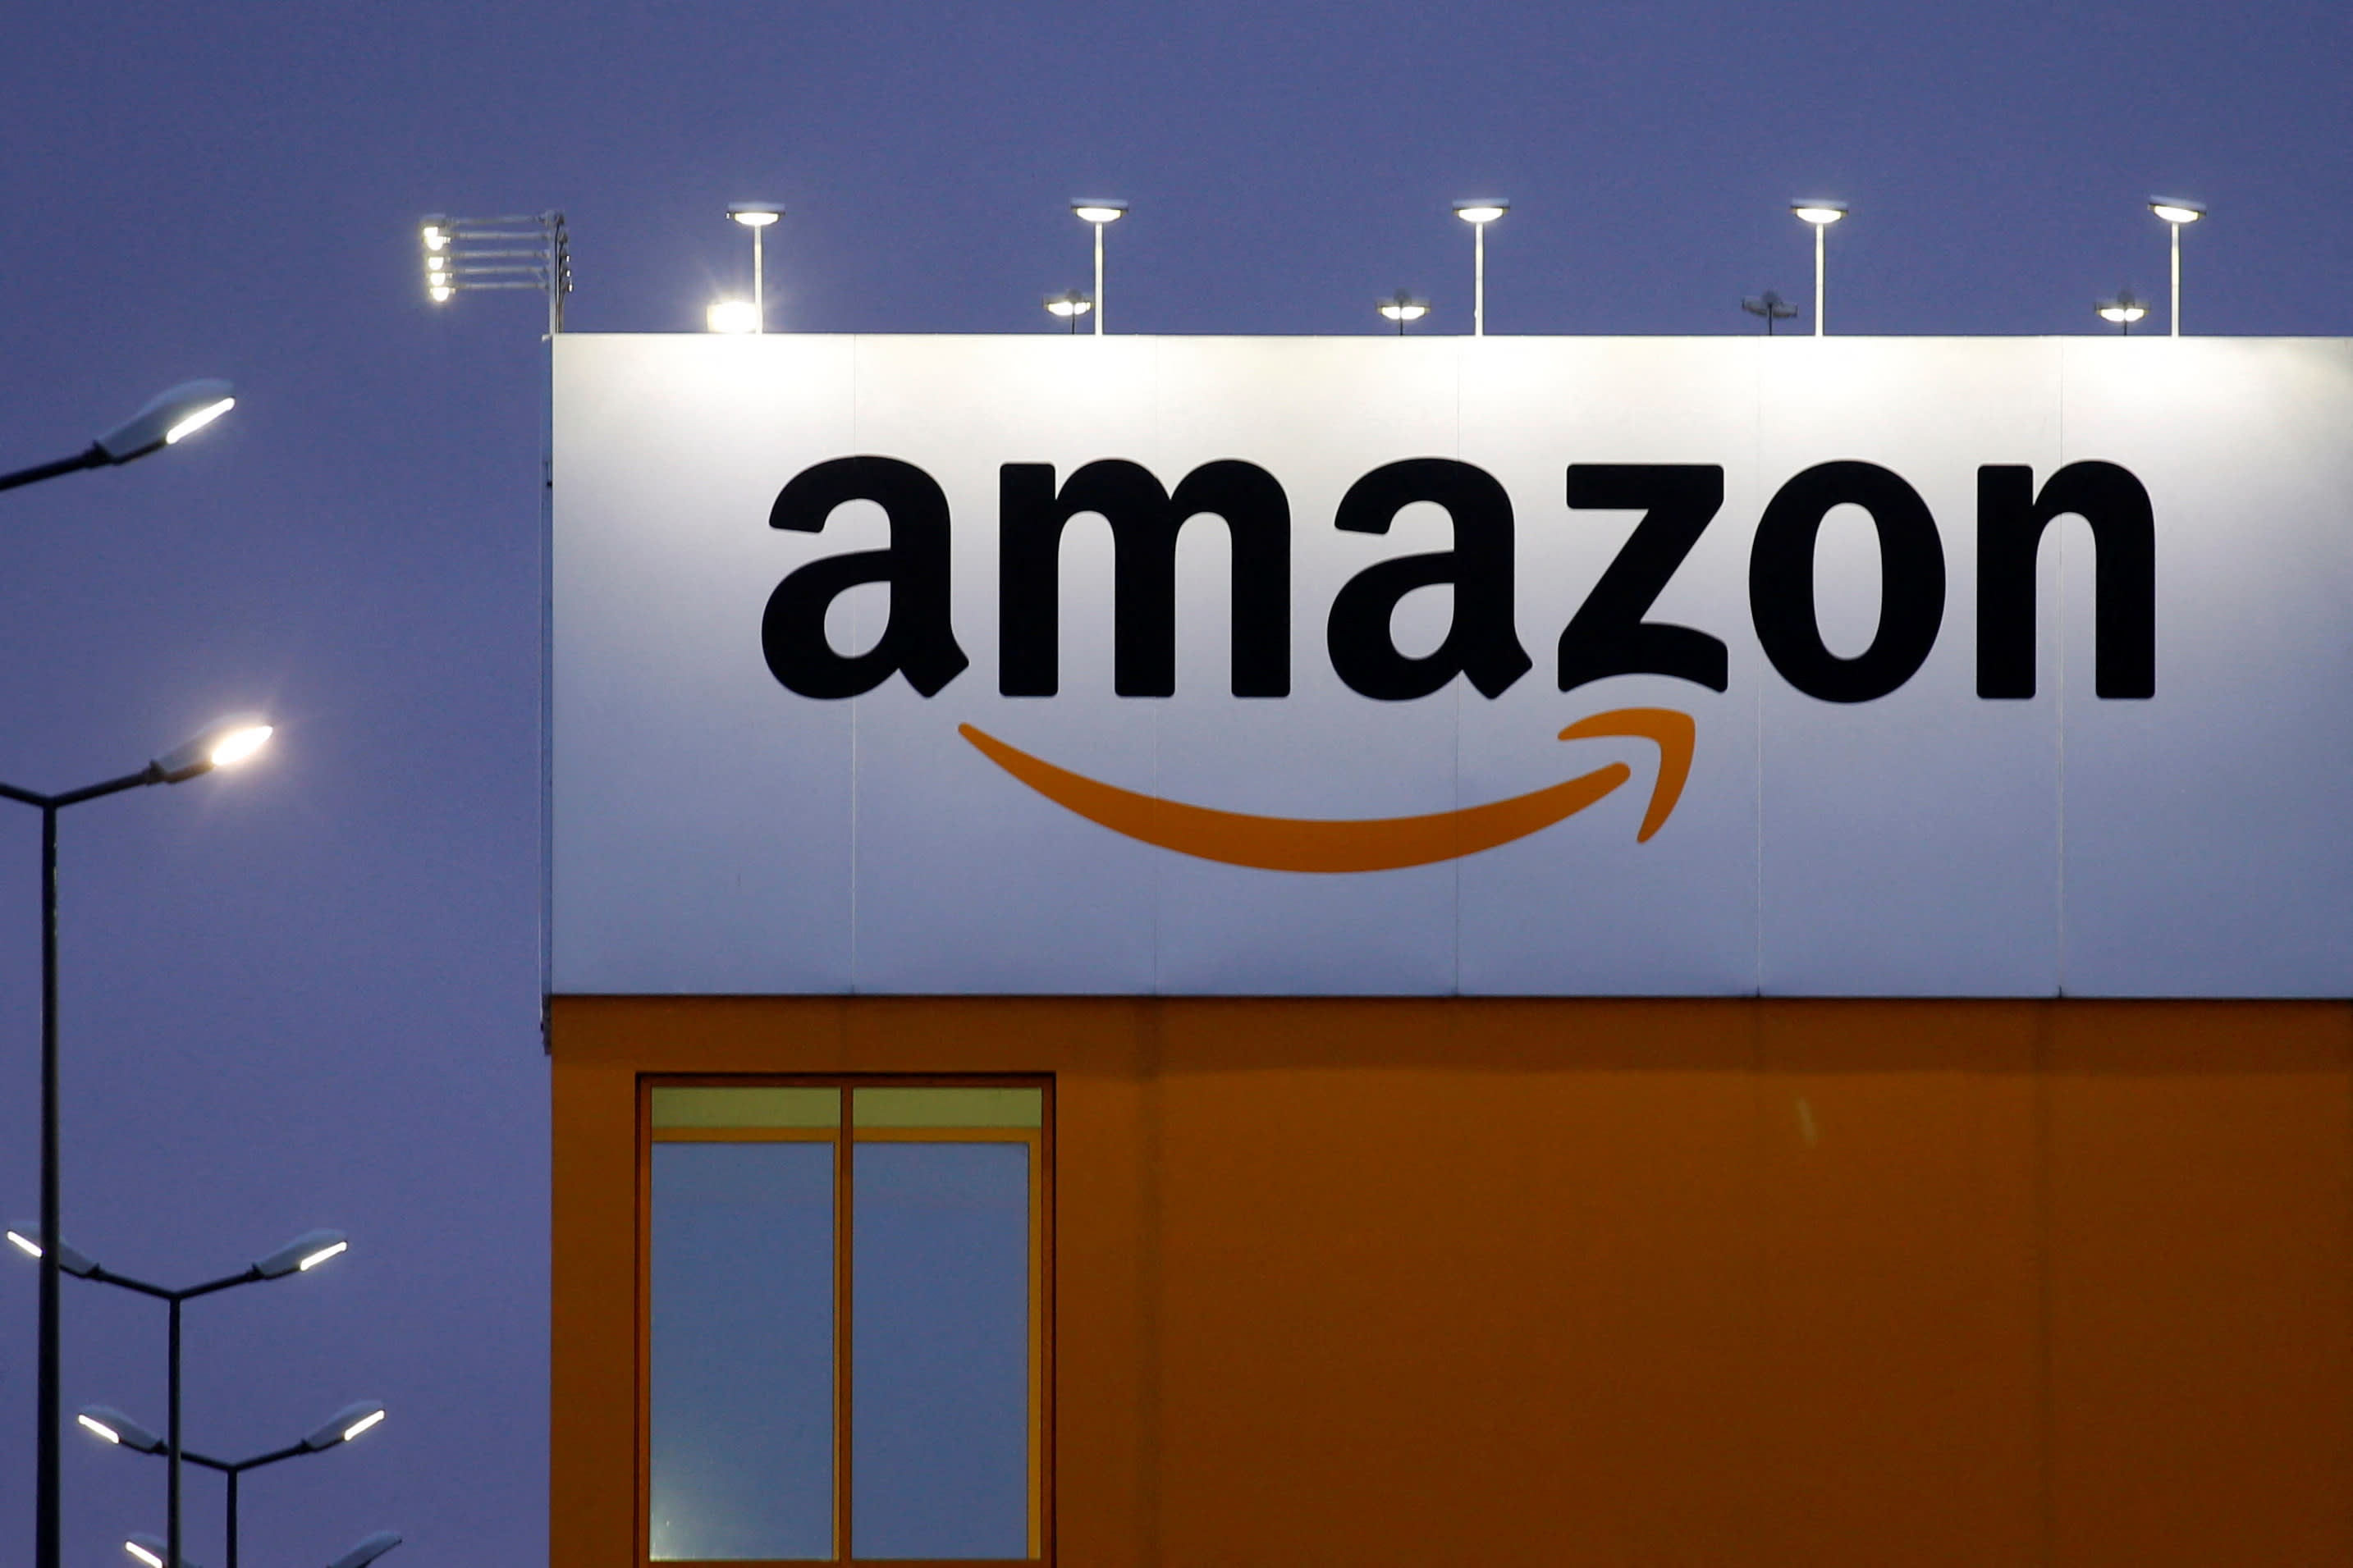 Amazon is down 40% this year — is now the time to buy? Market pros give their take